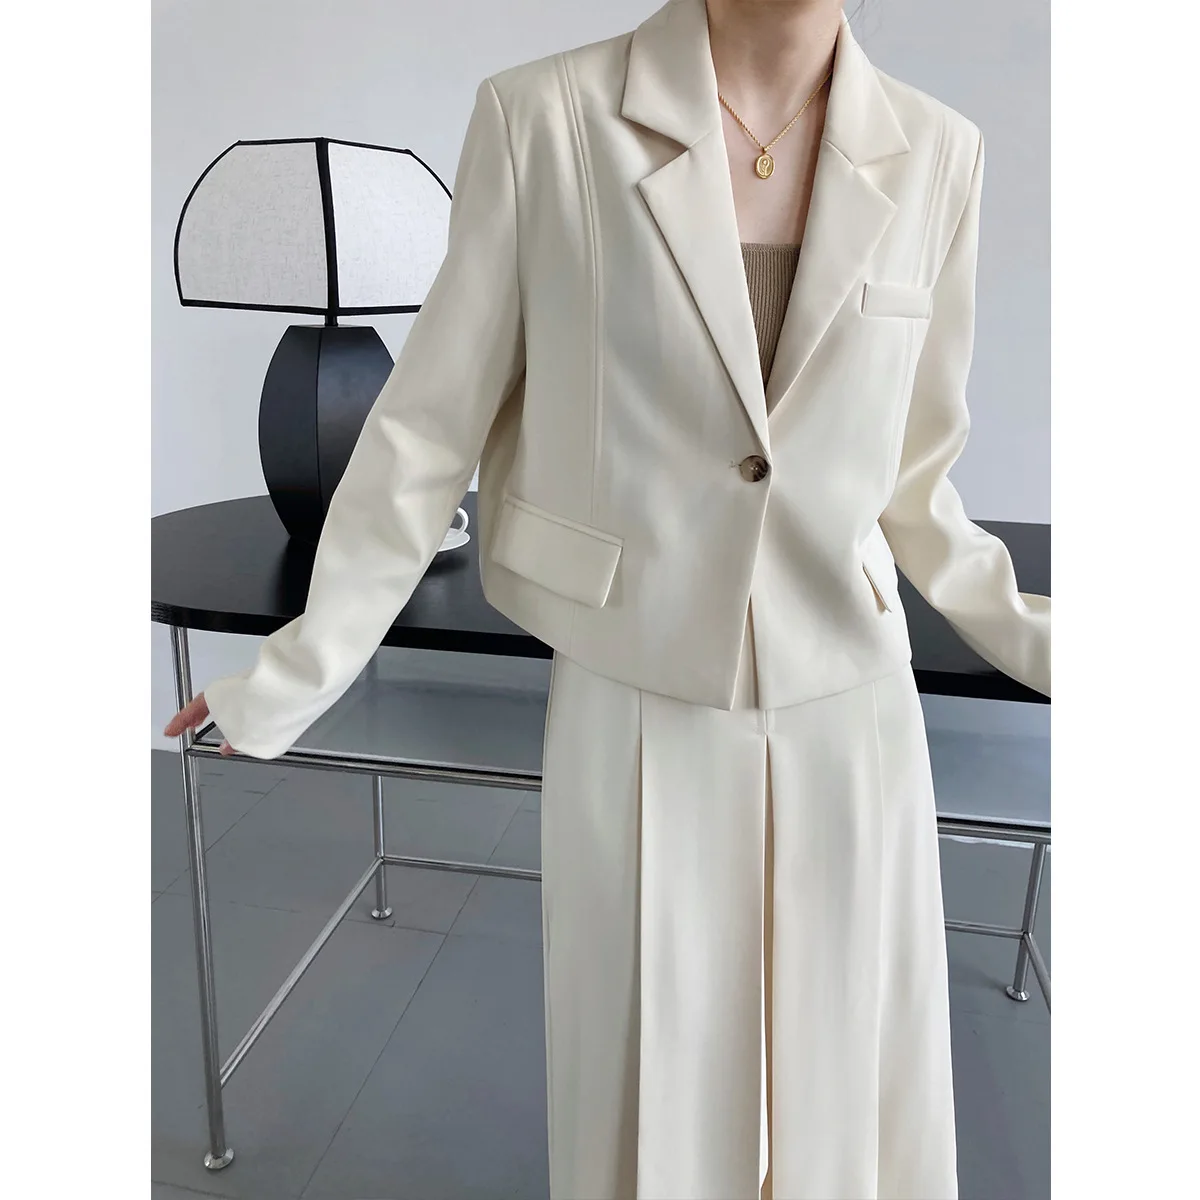 Autumn women's fashion suit jacket in long overskirt two-piece small suit women